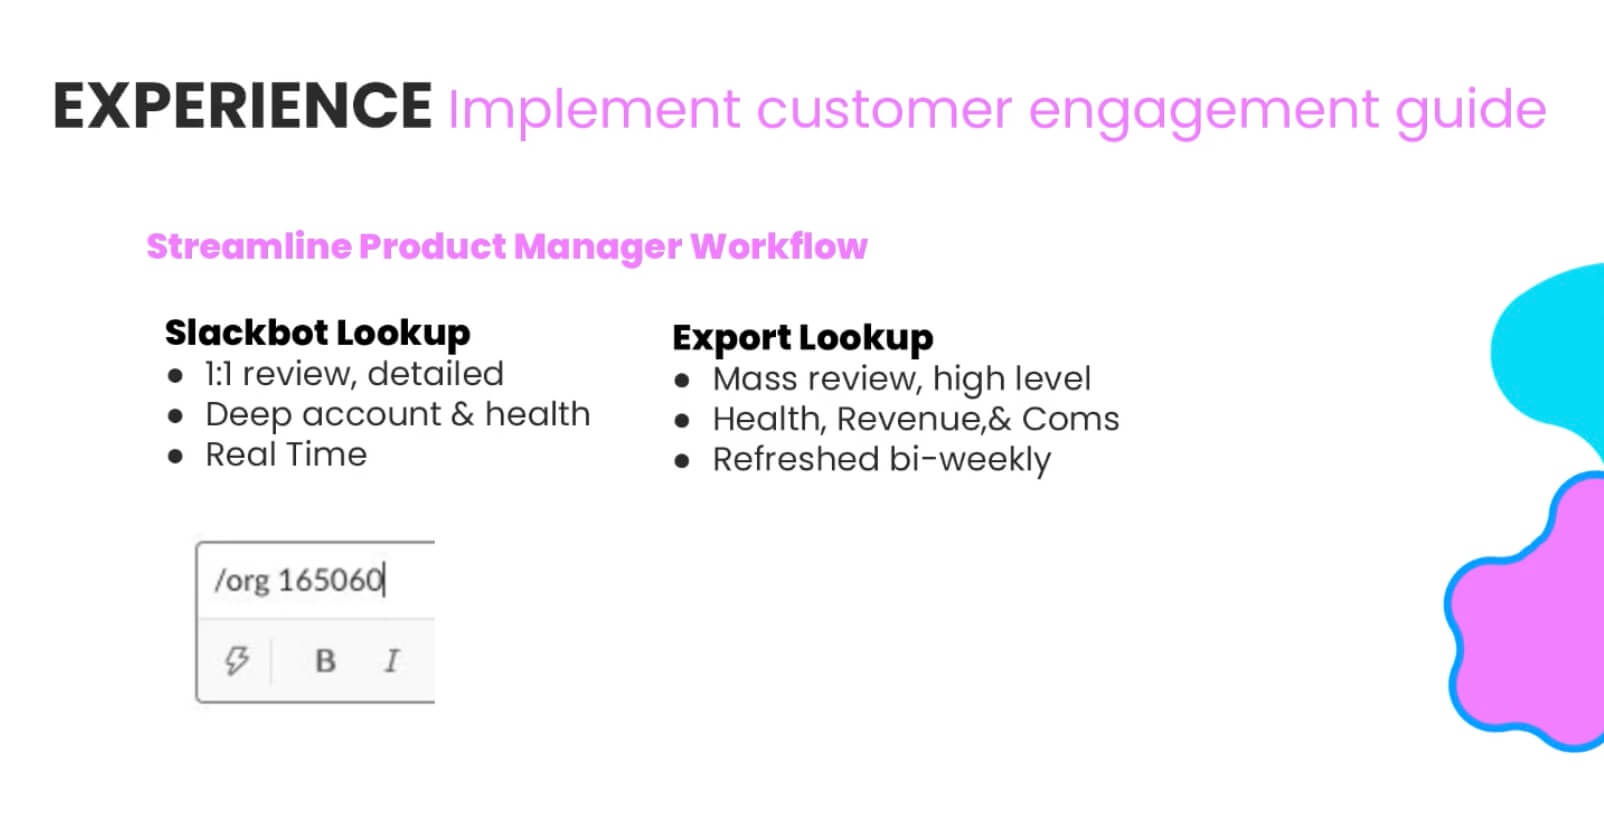 Experience: implement customer engagement guide